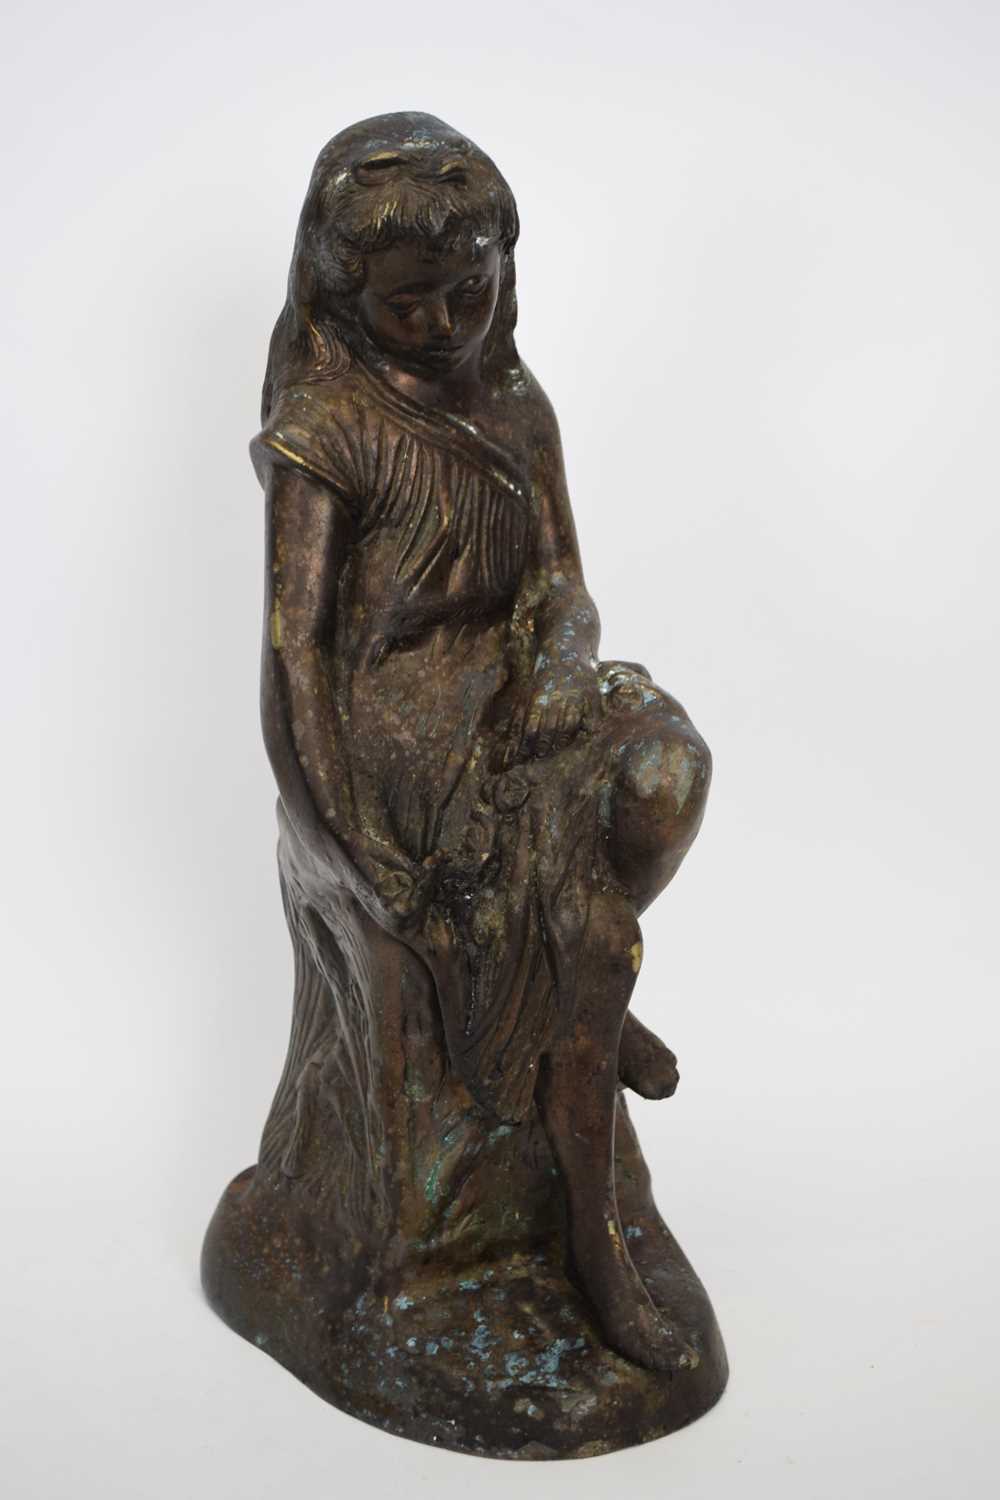 20th century hollow bronzed metal figure of a seated girl, 43cm high